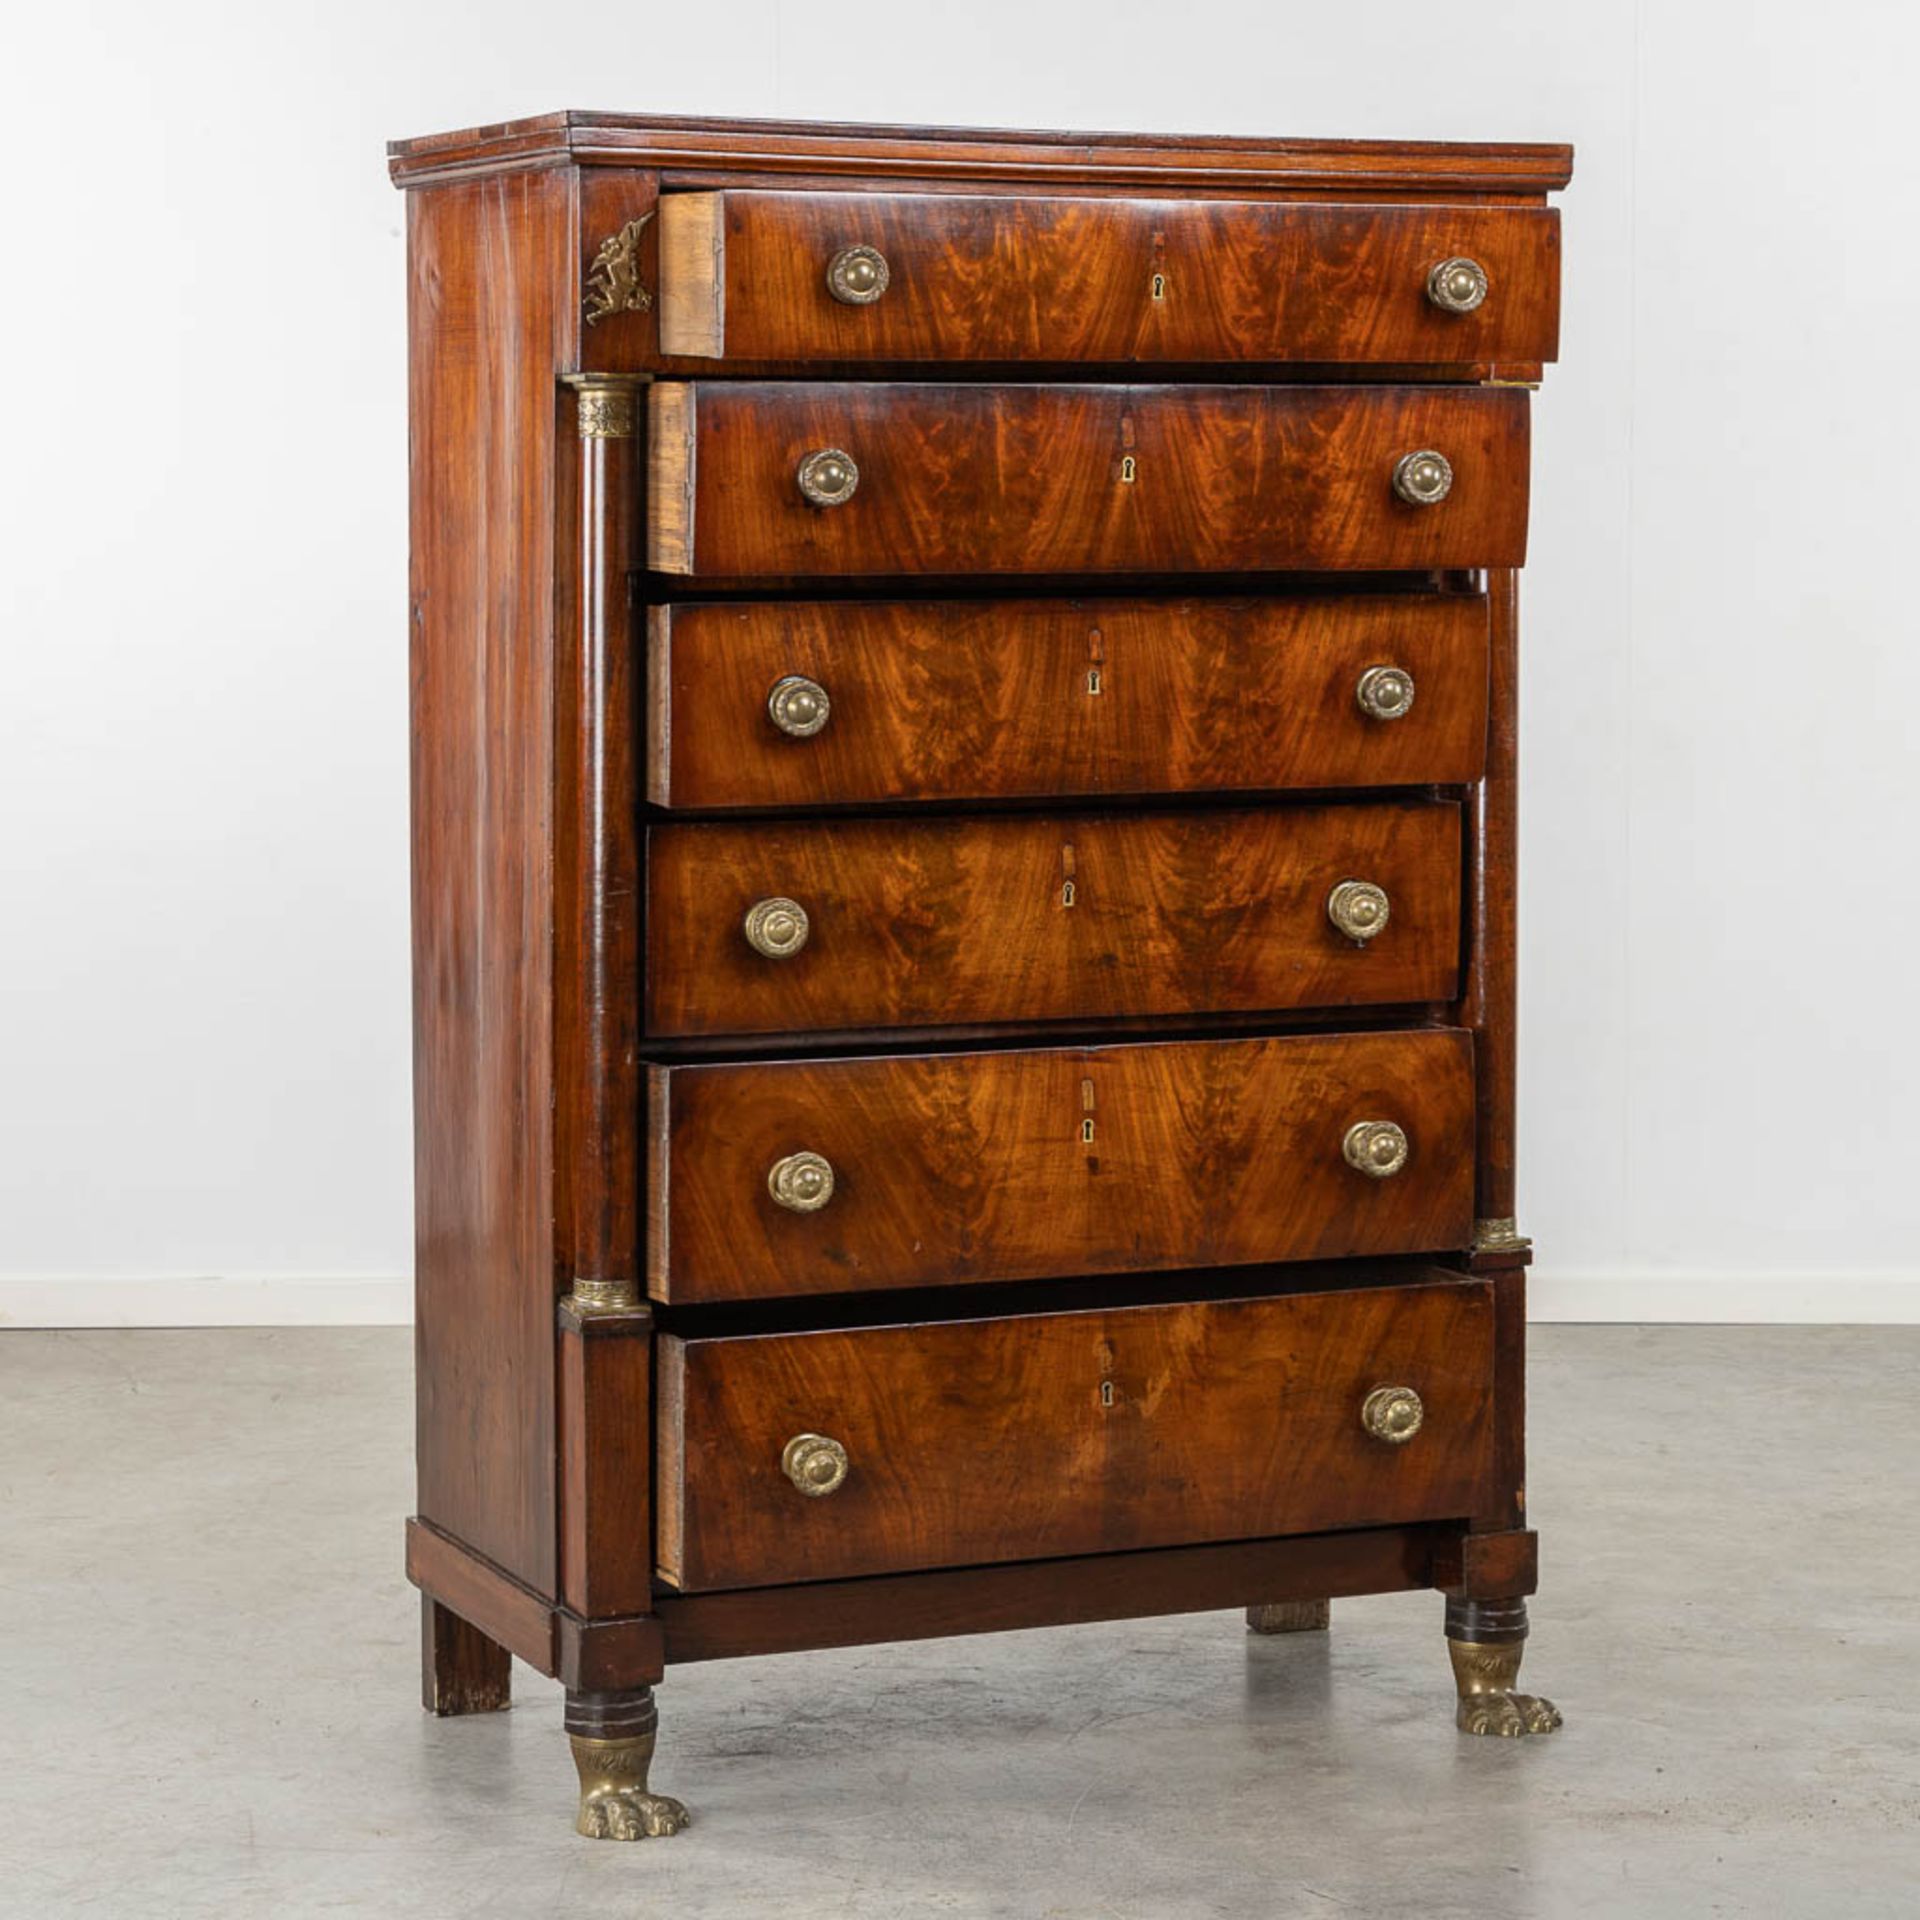 A 6-drawer cabinet, rosewood veneer mounted with bronze. Empire period, 19th C. (L:50 x W:100 x H:15 - Image 3 of 15